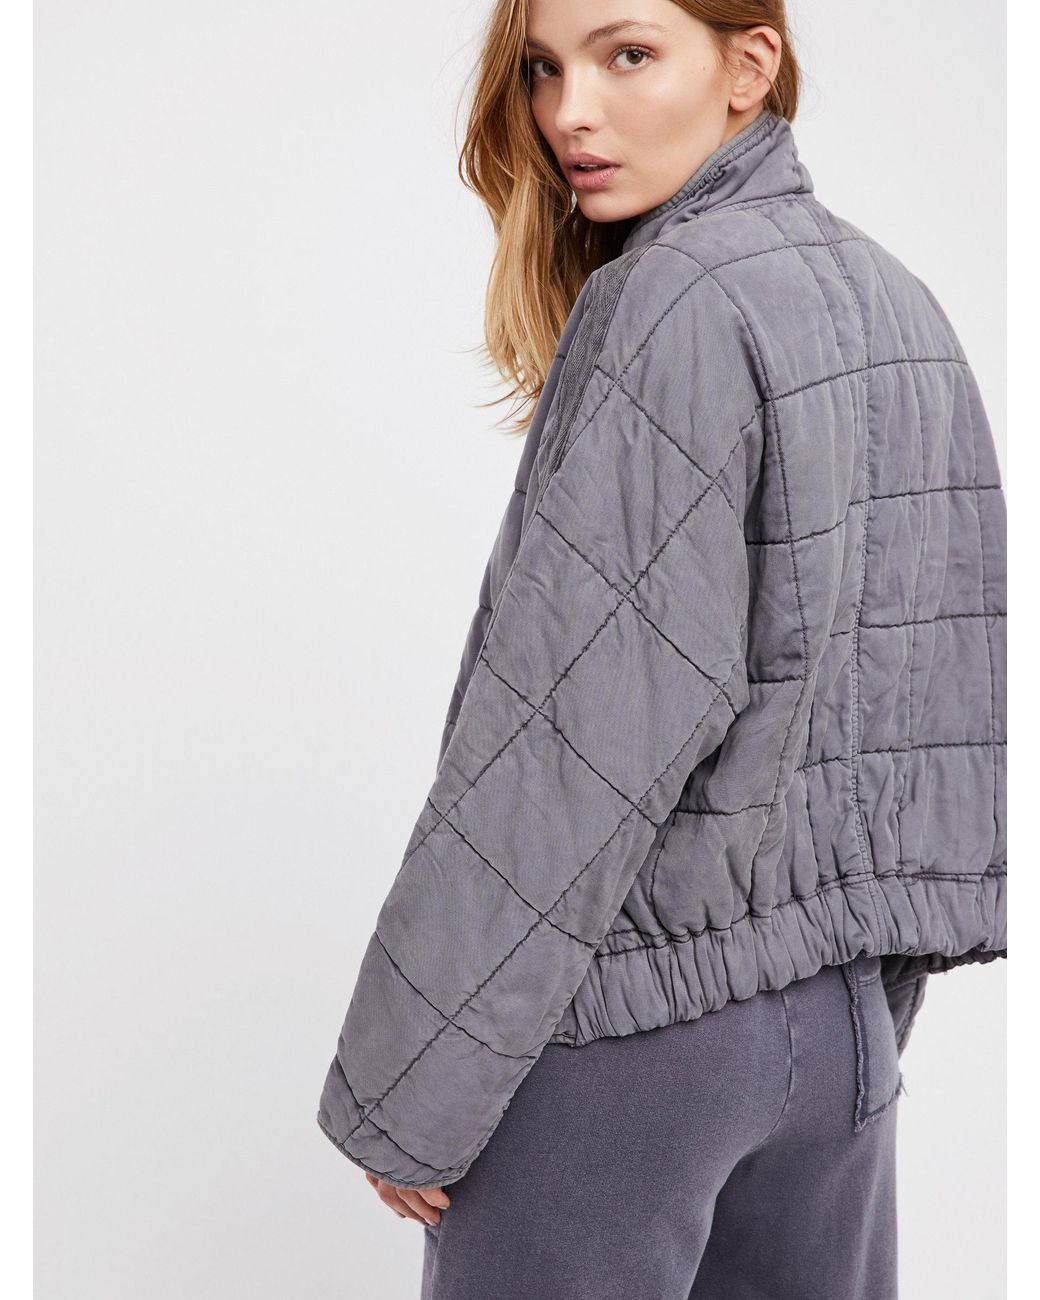 Free People Dolman Quilted Jacket in Grey | Lyst Canada